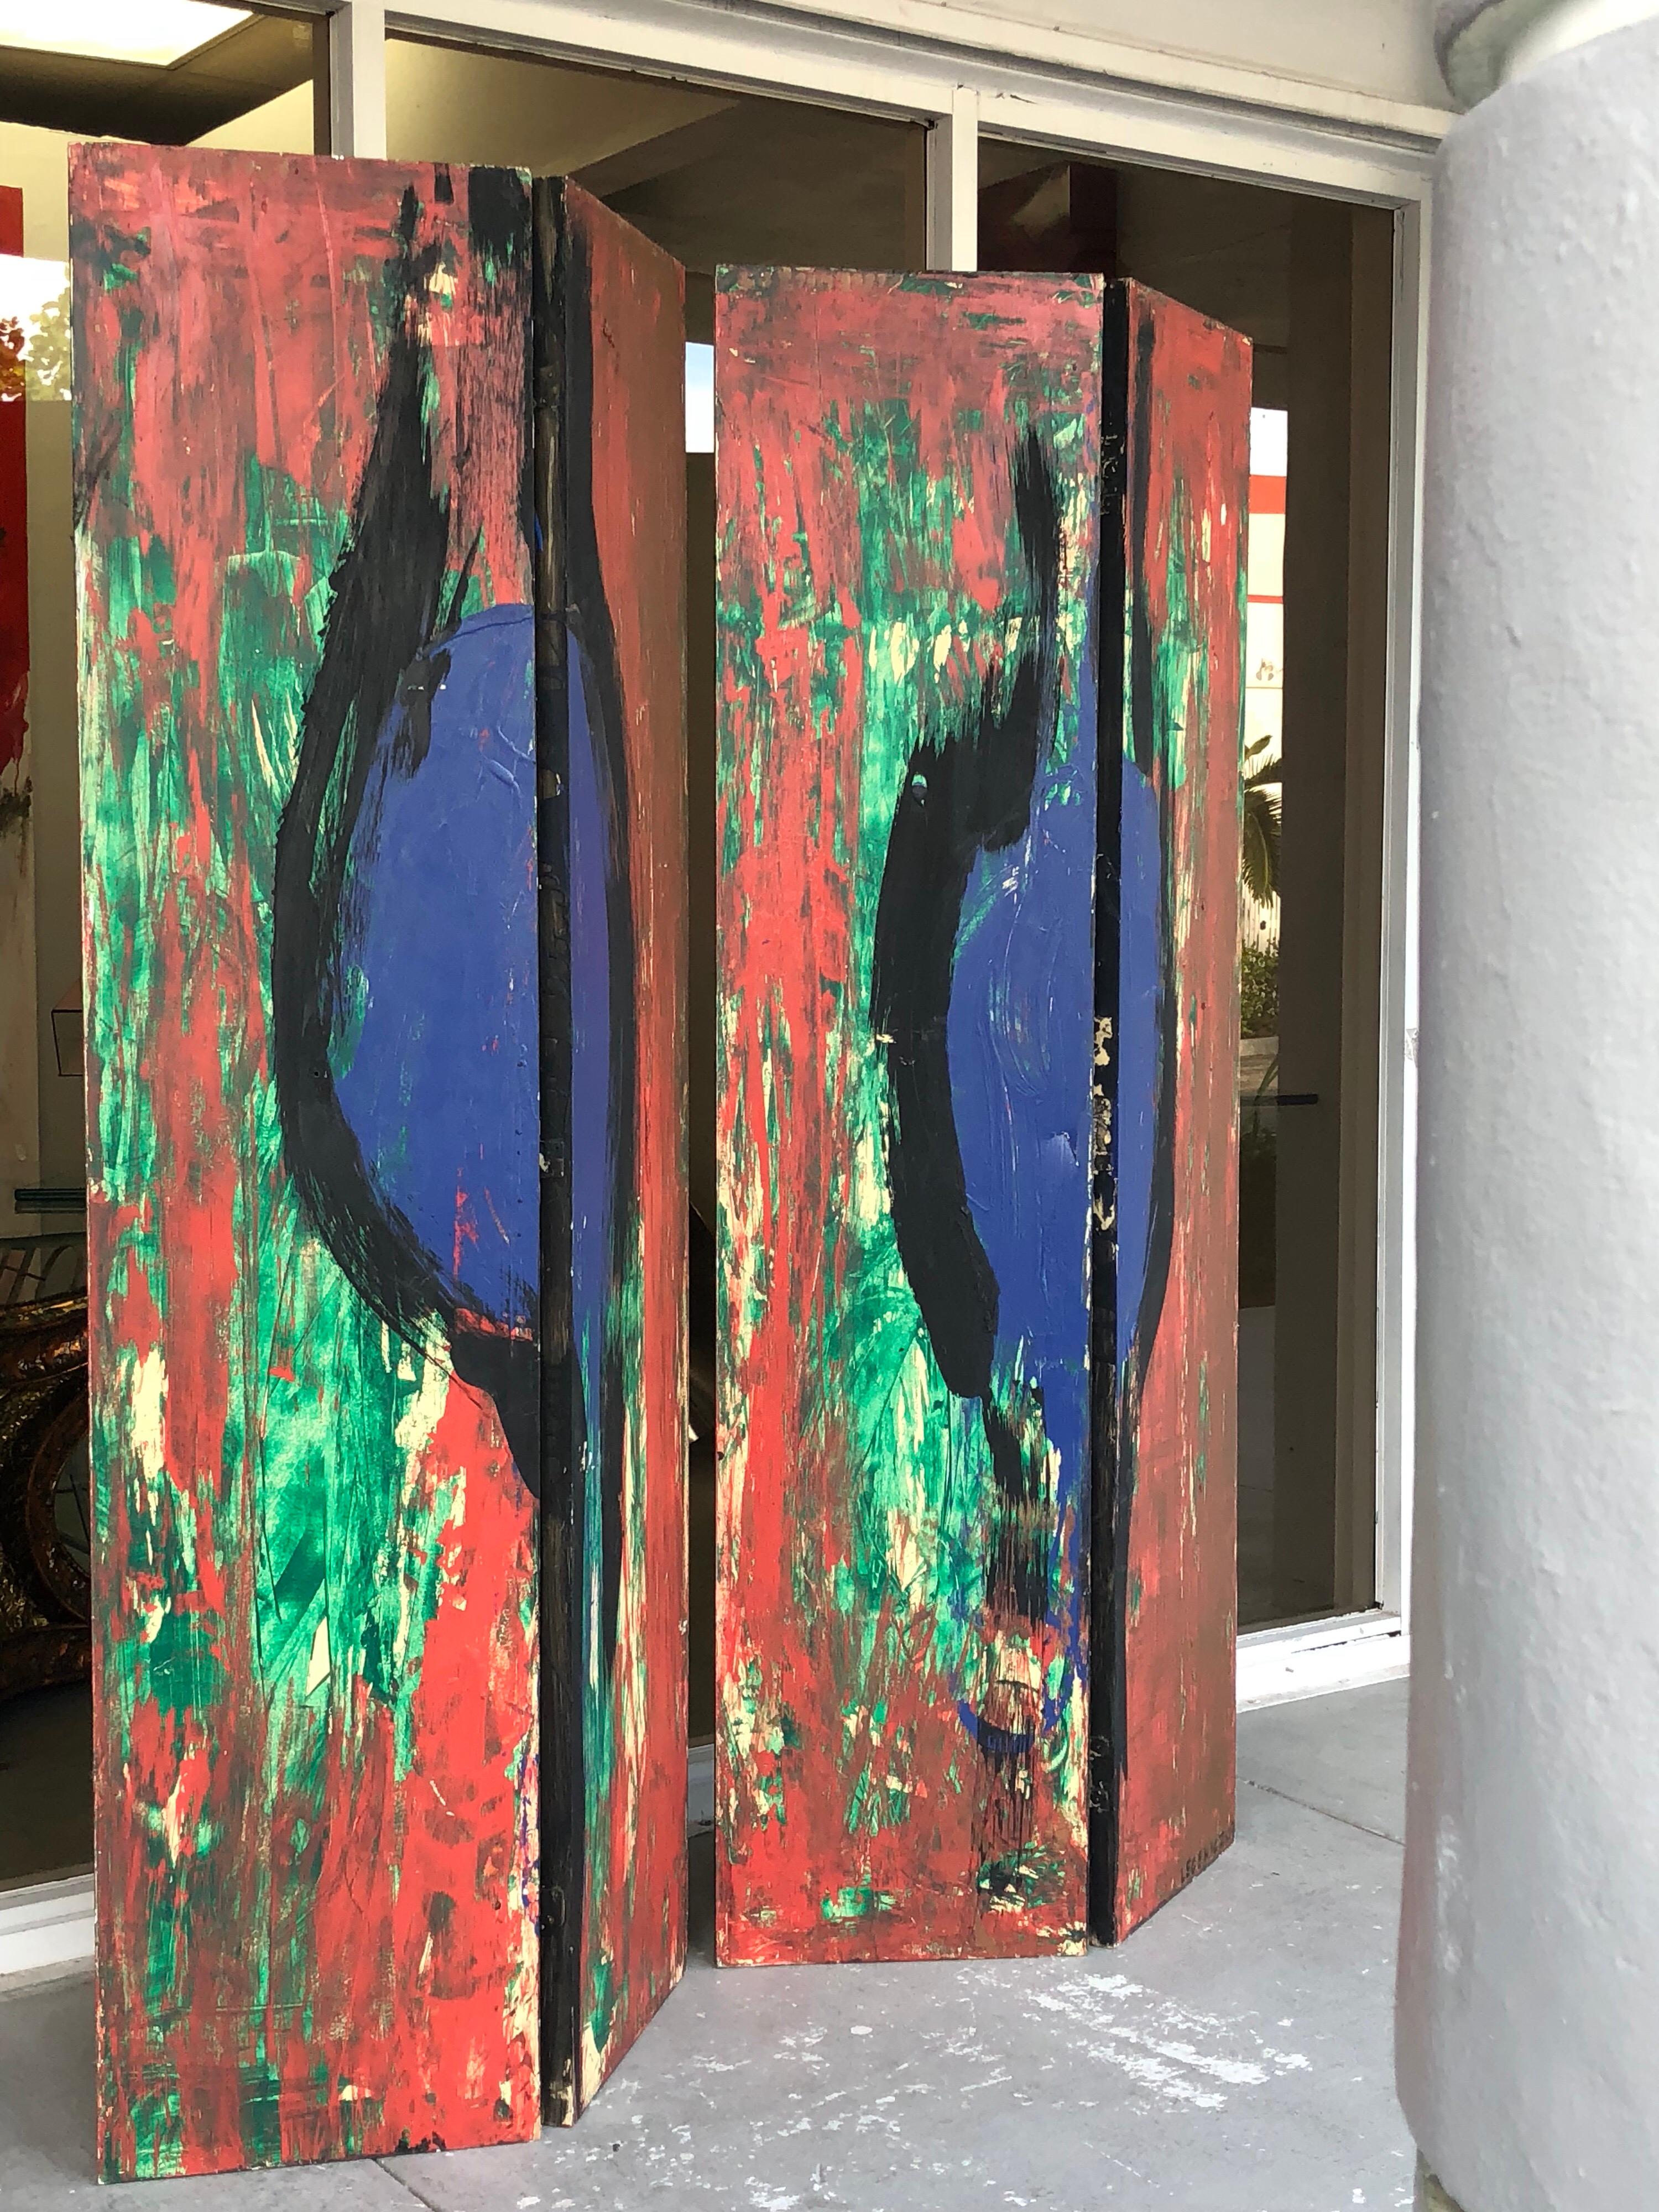 An artistic folding screen done in the abstract expressionist style on both sides. Signed and dated '09. This is a pair of double panel screens. 4 panels total. Each panel is 18